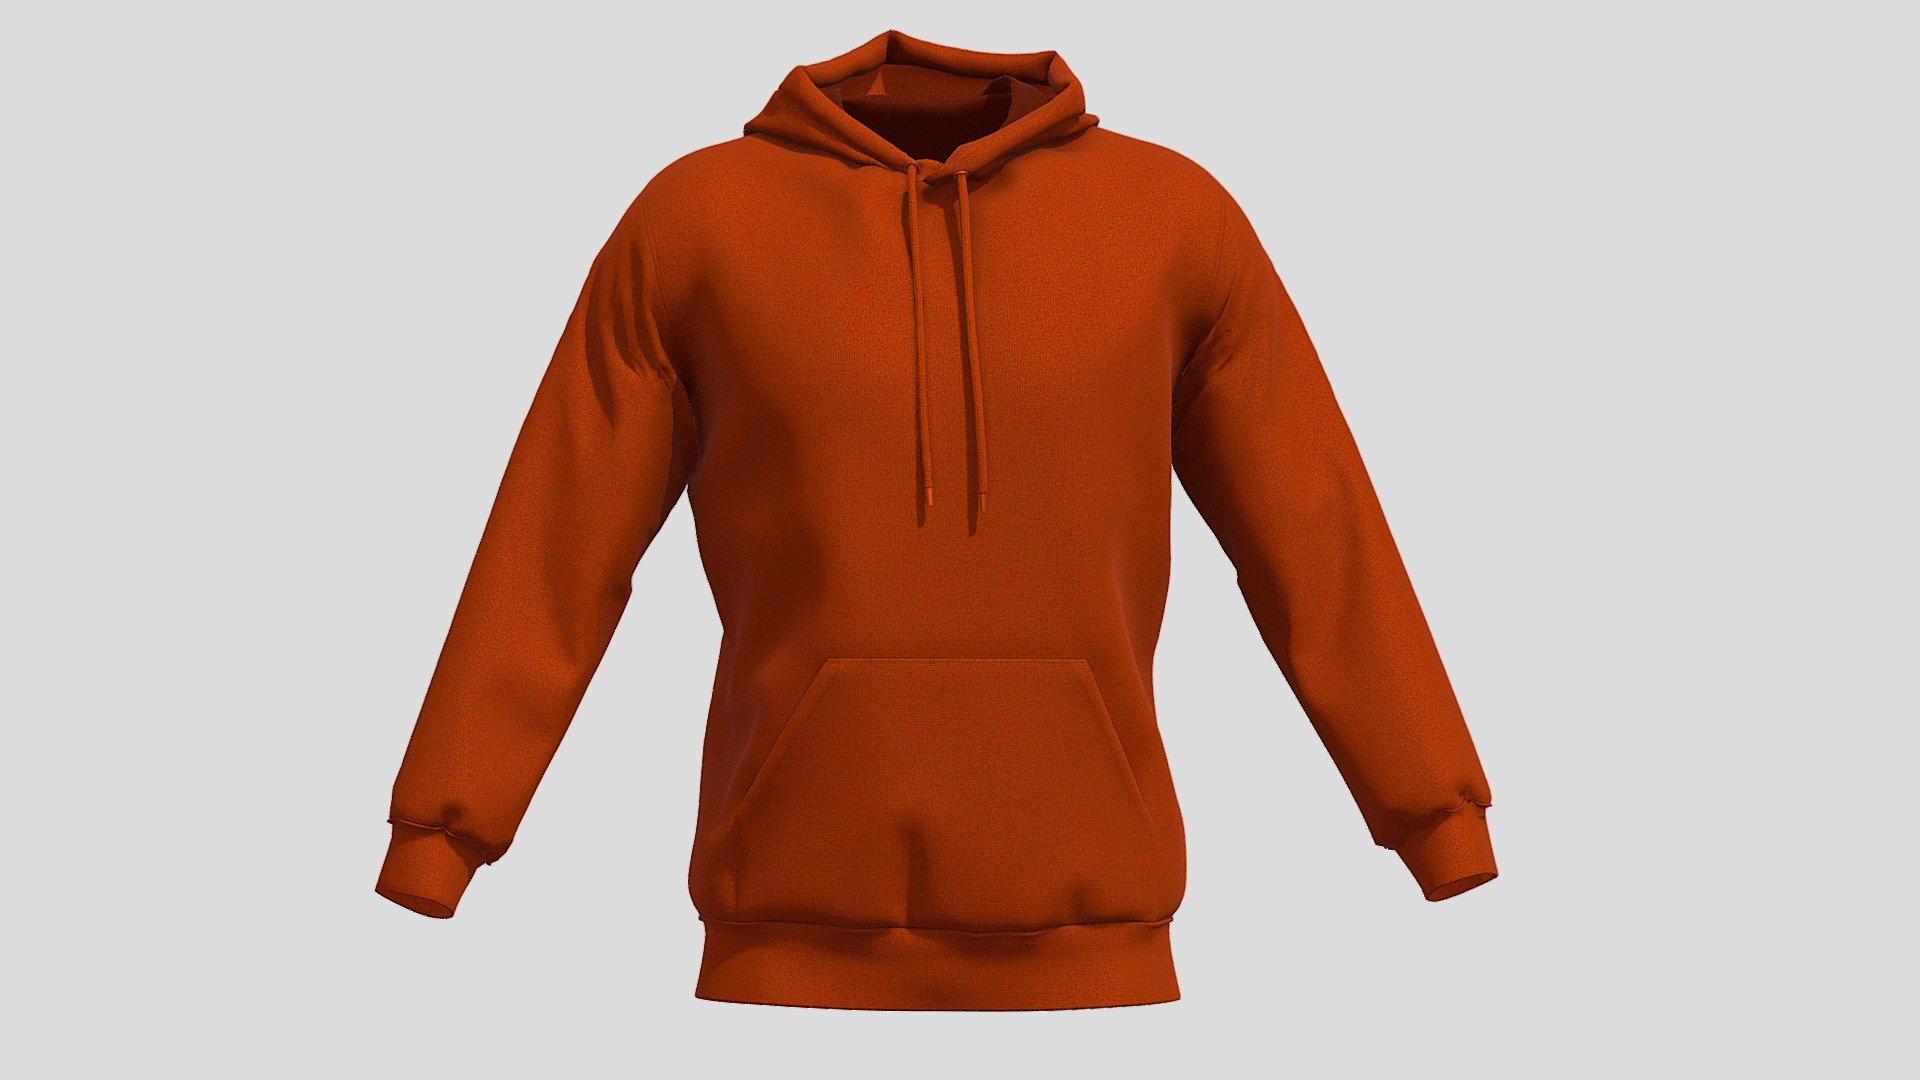 Hi, I'm Frezzy. I am leader of Cgivn studio. We are a team of talented artists working together since 2013.
If you want hire me to do 3d model please touch me at:cgivn.studio Thanks you! - Hoodie Orange PBR Realistic - Buy Royalty Free 3D model by Frezzy (@frezzy3d) 3d model